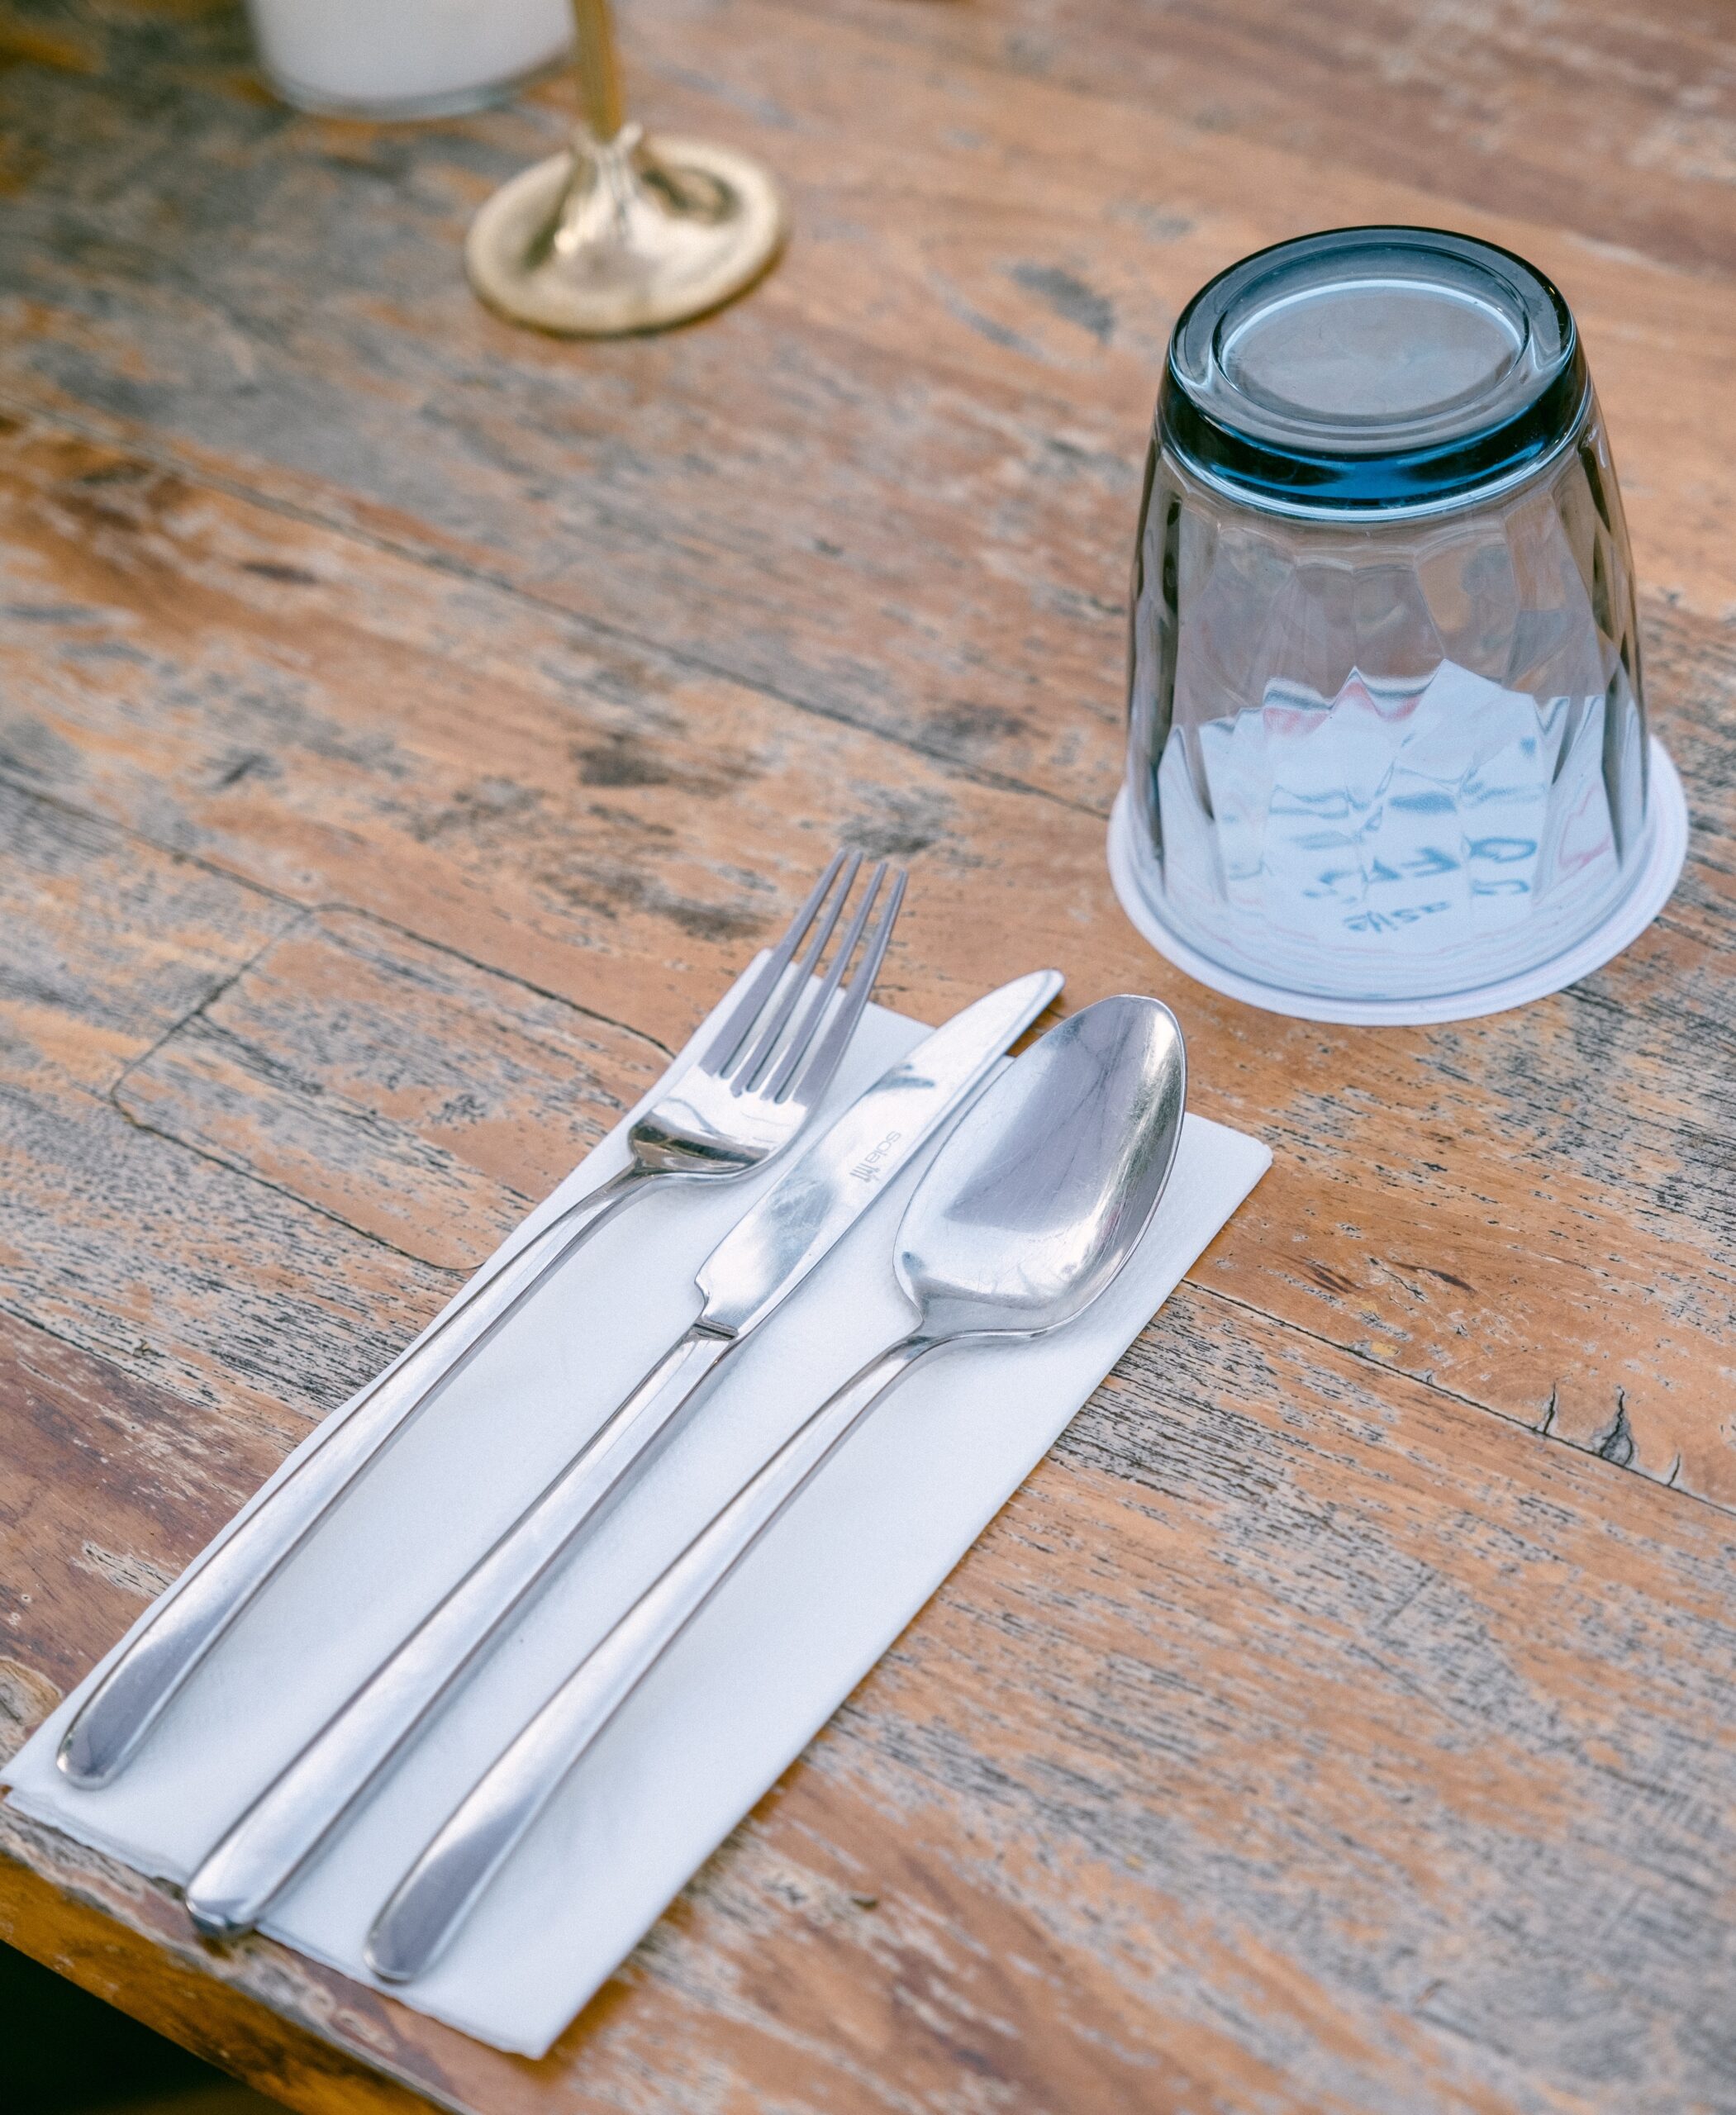 cutlery and glass on a wooden table